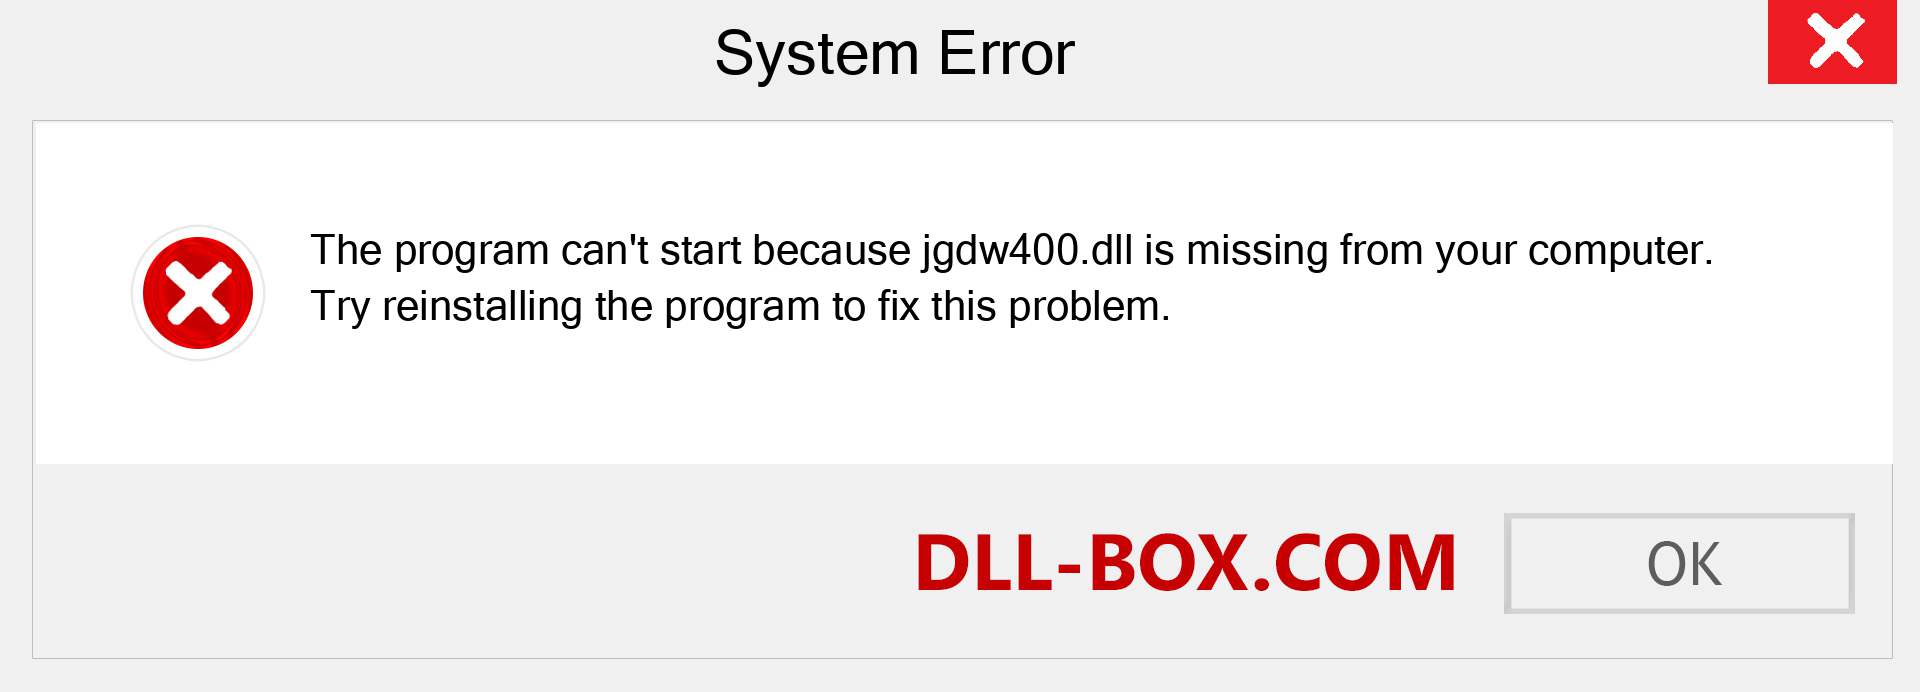  jgdw400.dll file is missing?. Download for Windows 7, 8, 10 - Fix  jgdw400 dll Missing Error on Windows, photos, images